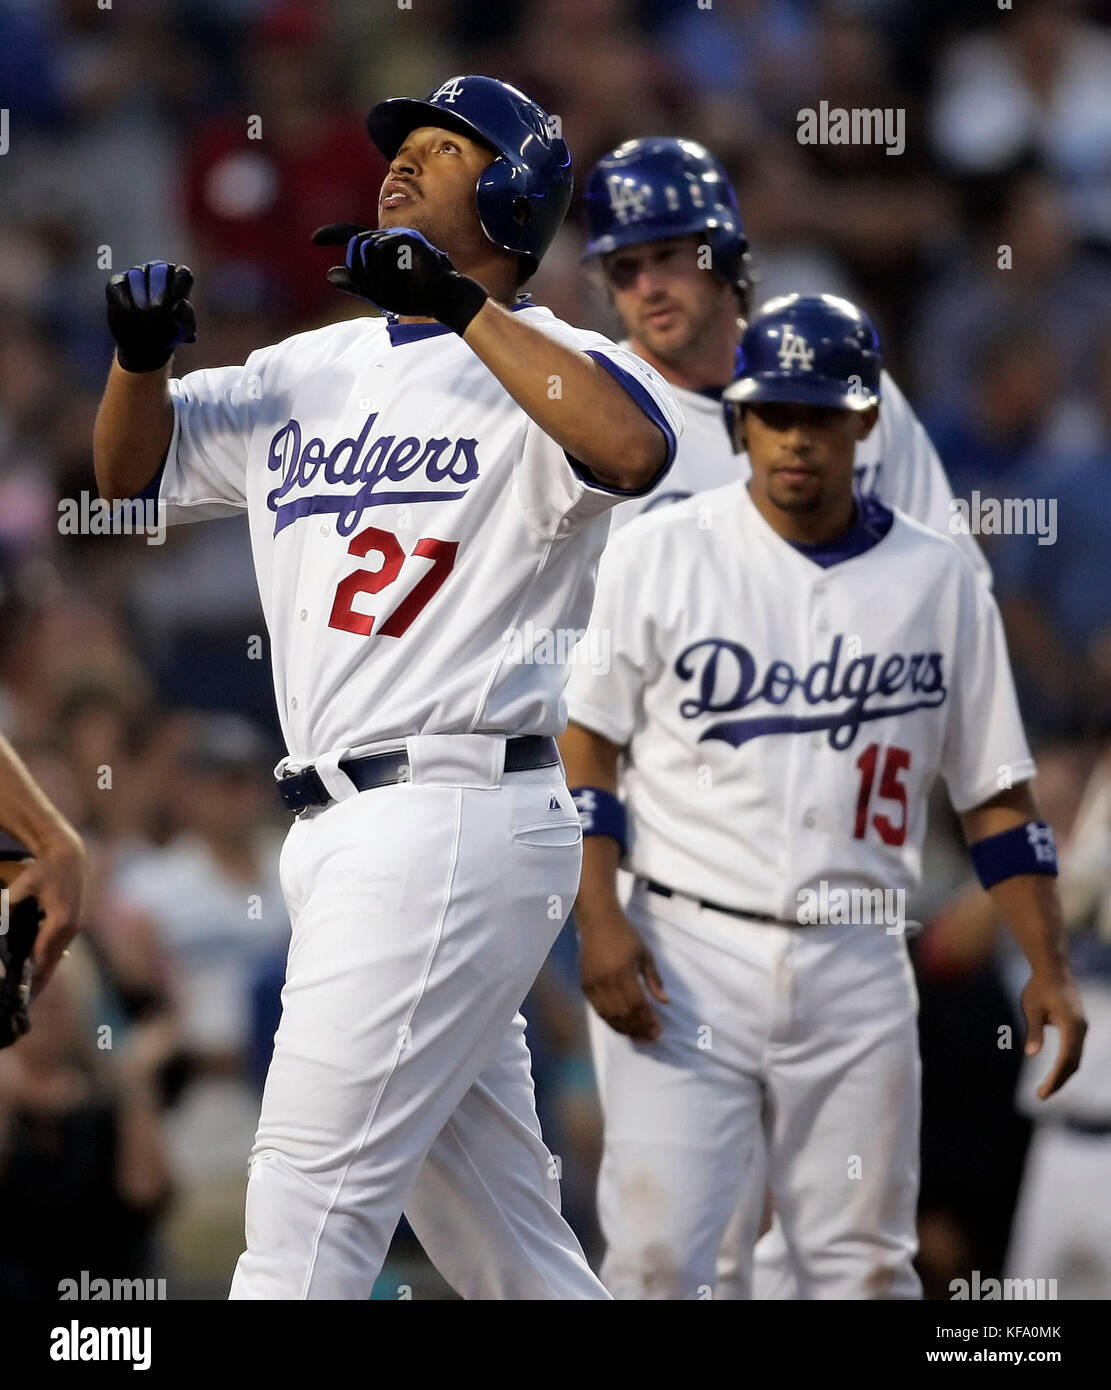 Los Angeles Dodgers' Matt Kemp, left, looks skyward while crossing home after hitting a three-run homer off Philadelphia Phillies pitcher Gavin Floyd that drove in Rafael Furcal (15) and Derek Lowe, background, in the second inning of a baseball game in Los Angeles on Thursday, June 1, 2006. Photo by Francis Specker Stock Photo